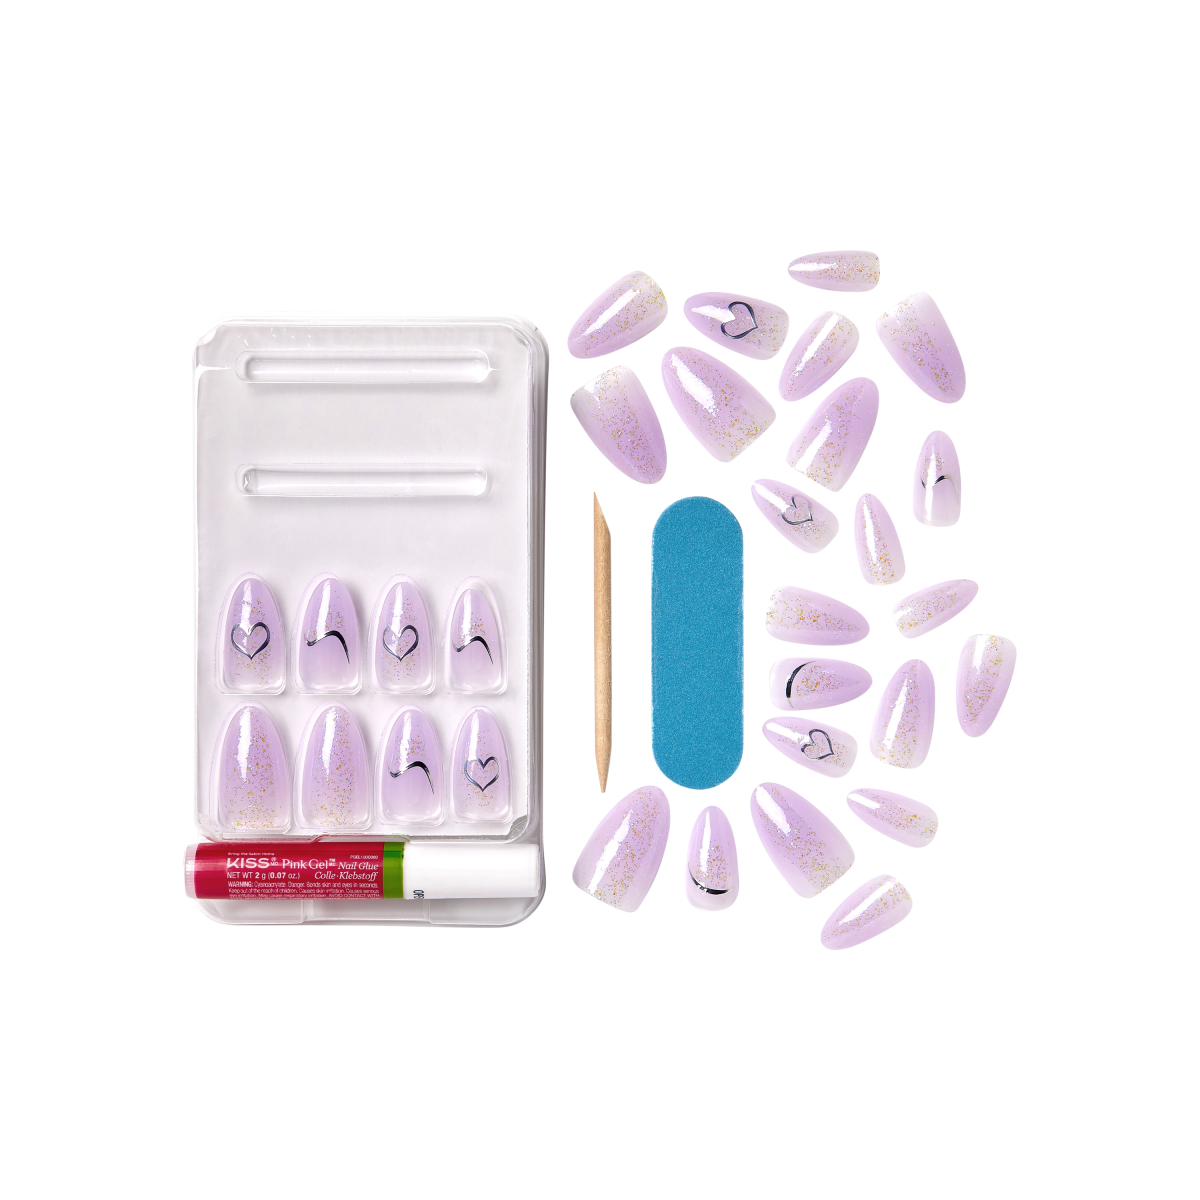 KISS Gel Fantasy, Press-On Nails, One Day Jelly, Purple, Med Almond, 28ct